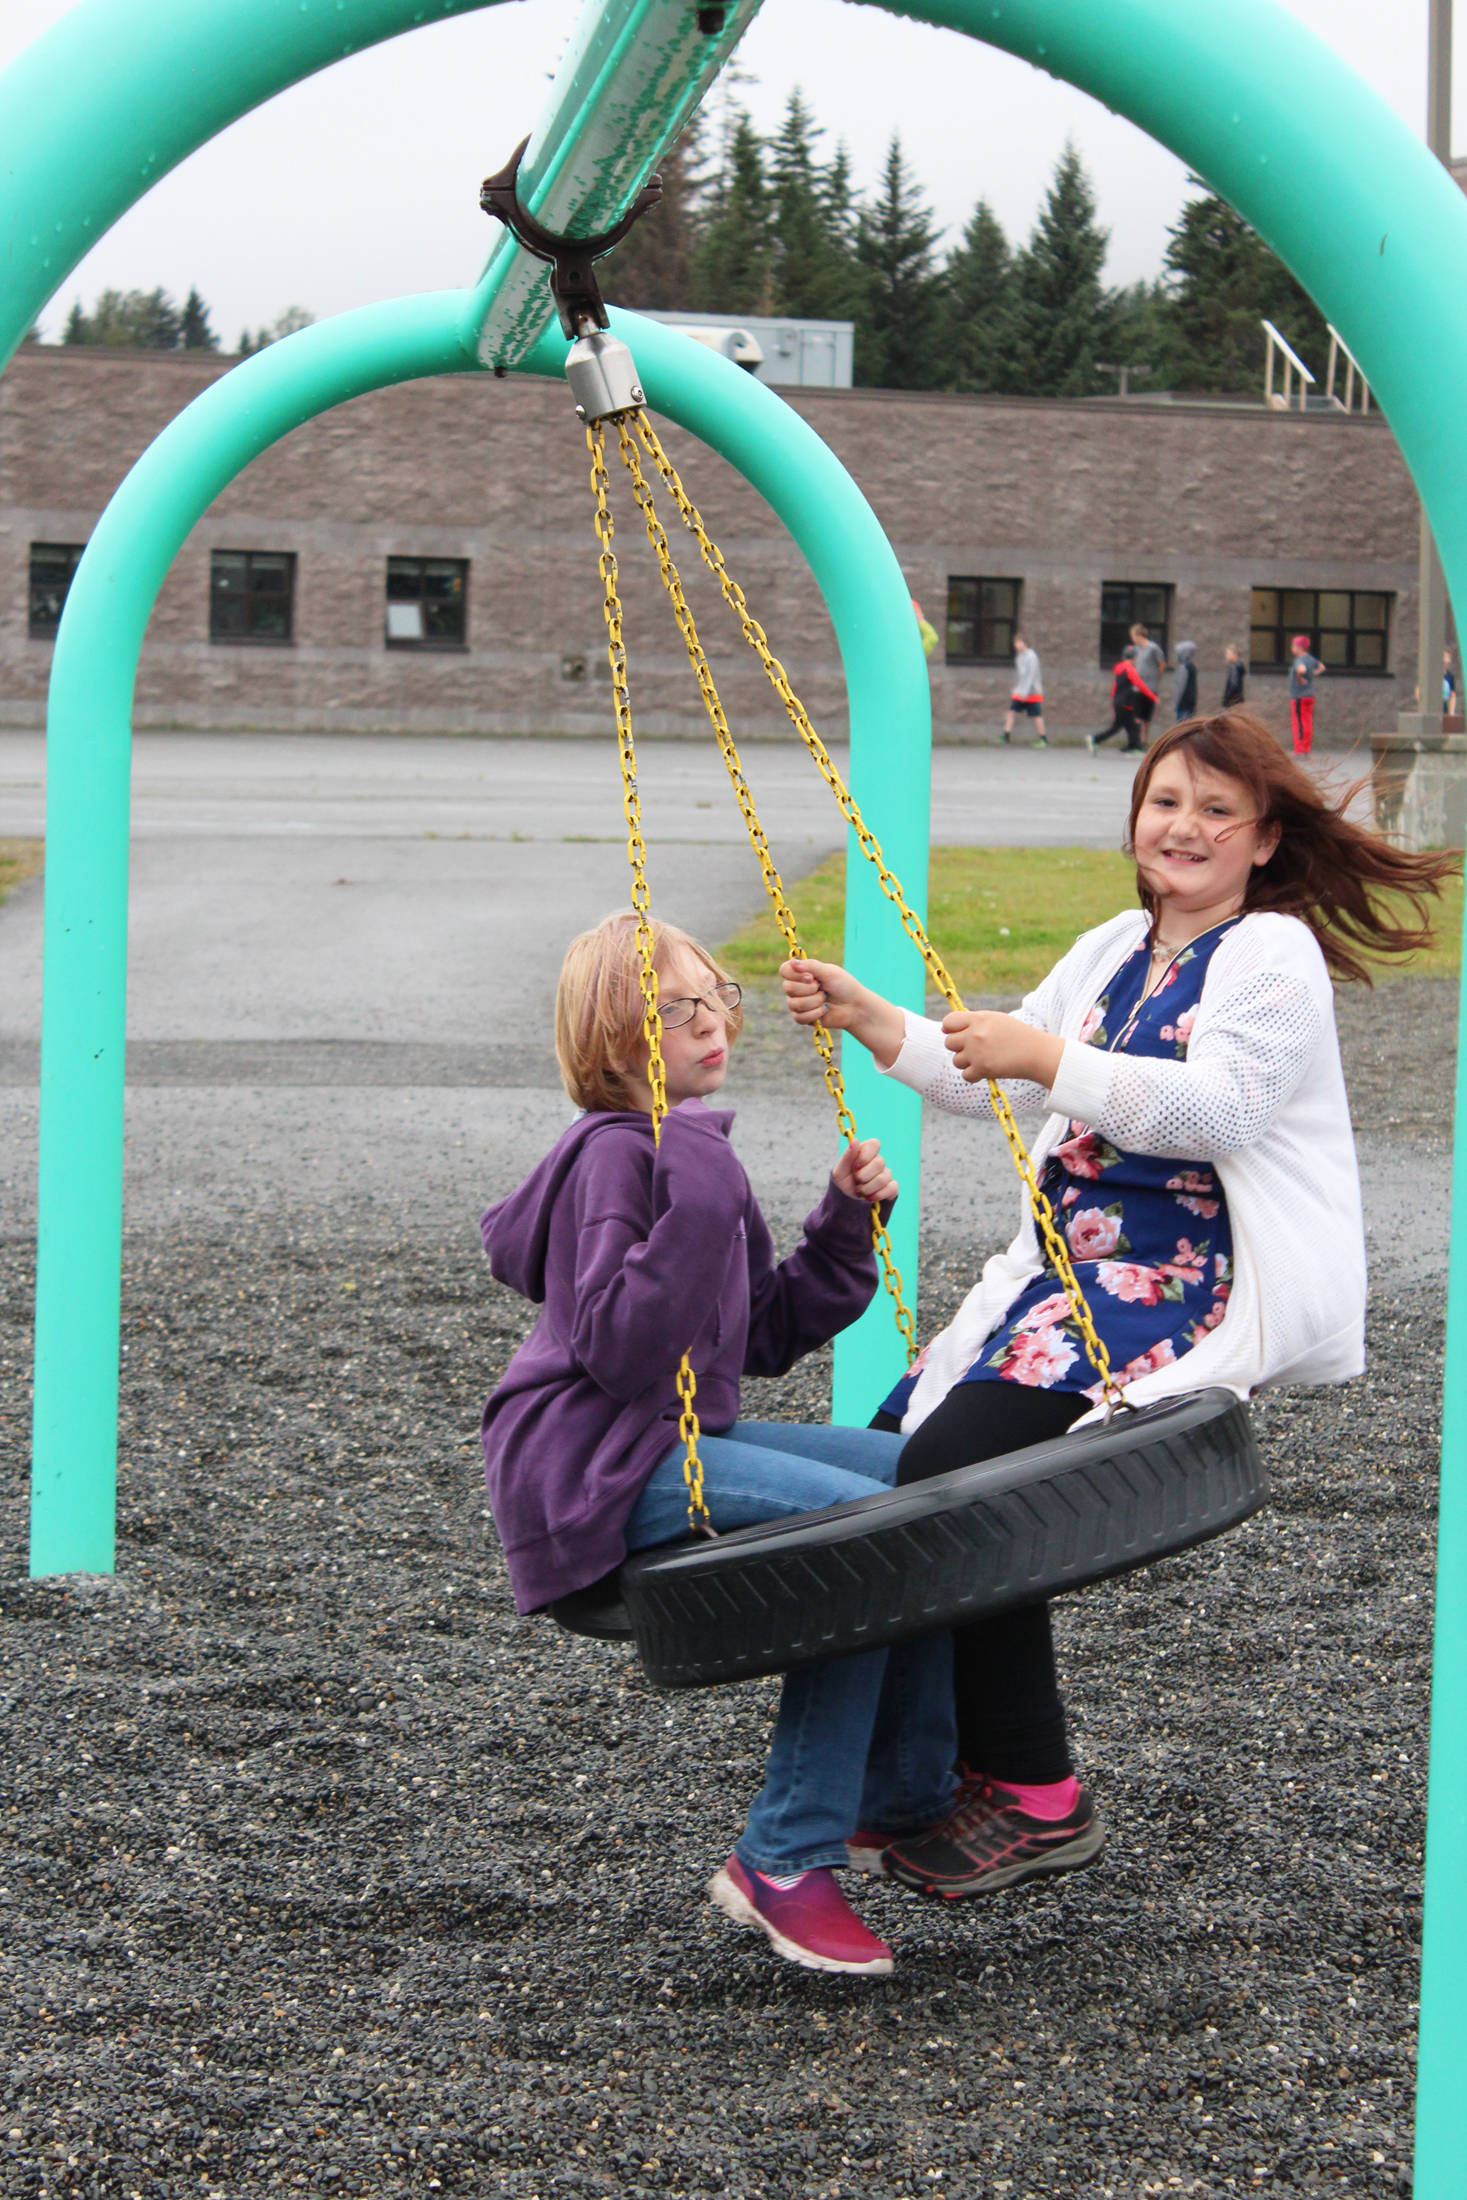 Emily Boyle and Hailey Van Sandt swing during recess on the first day of school at West Homer Elementary, Tuesday, Aug. 21, 2018 in Homer, Alaska. (Photo by Megan Pacer/Homer News)